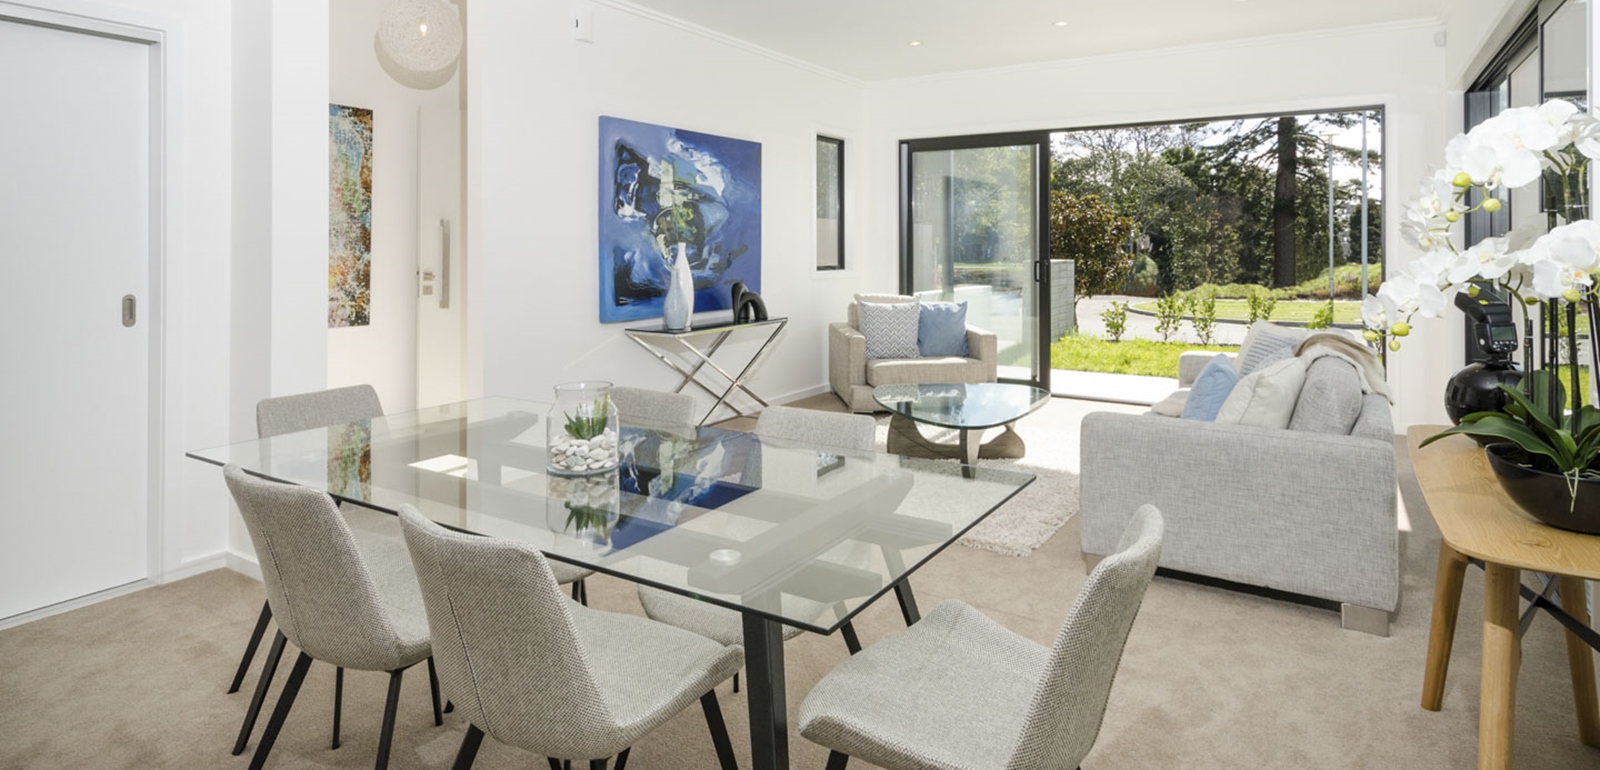 Dining and living area in the Classic Builders Showhome at Hobsonville Point